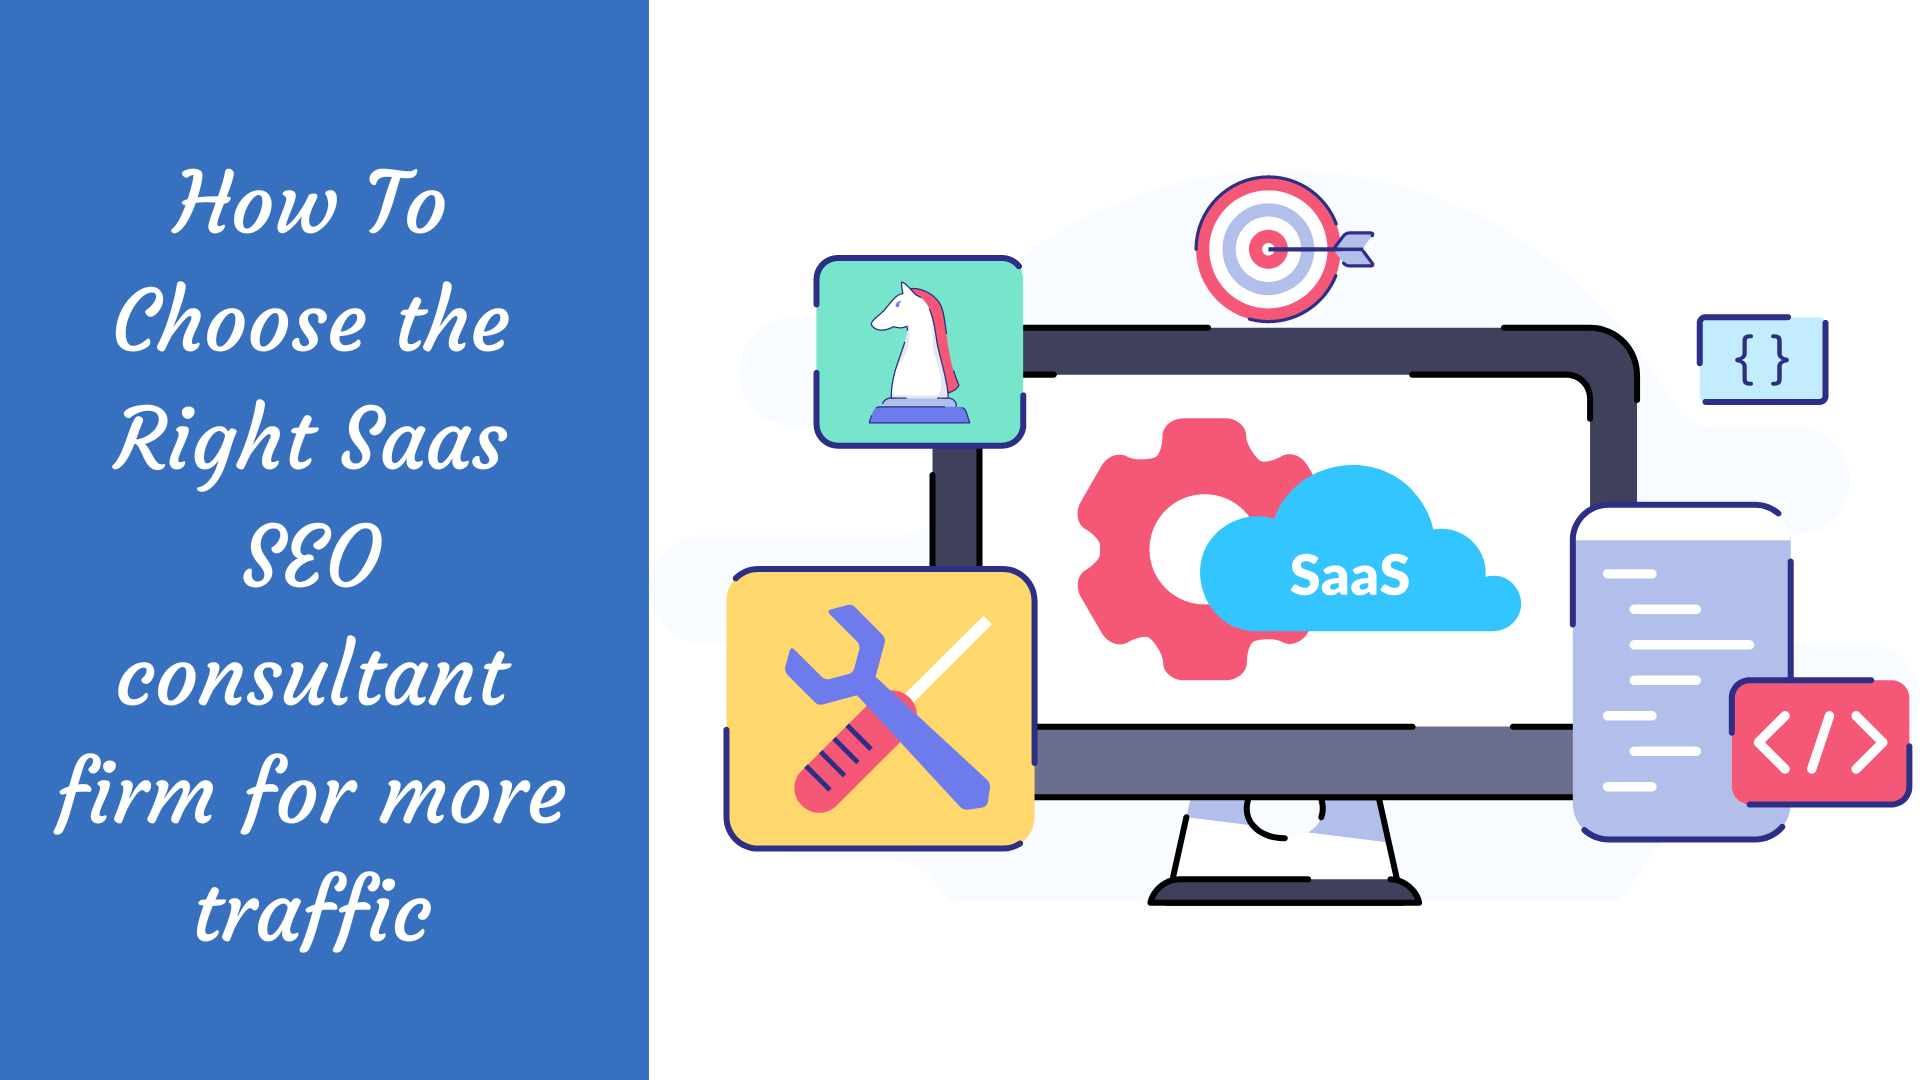 You are currently viewing How To Choose the Right Saas SEO consultant firm for more traffic